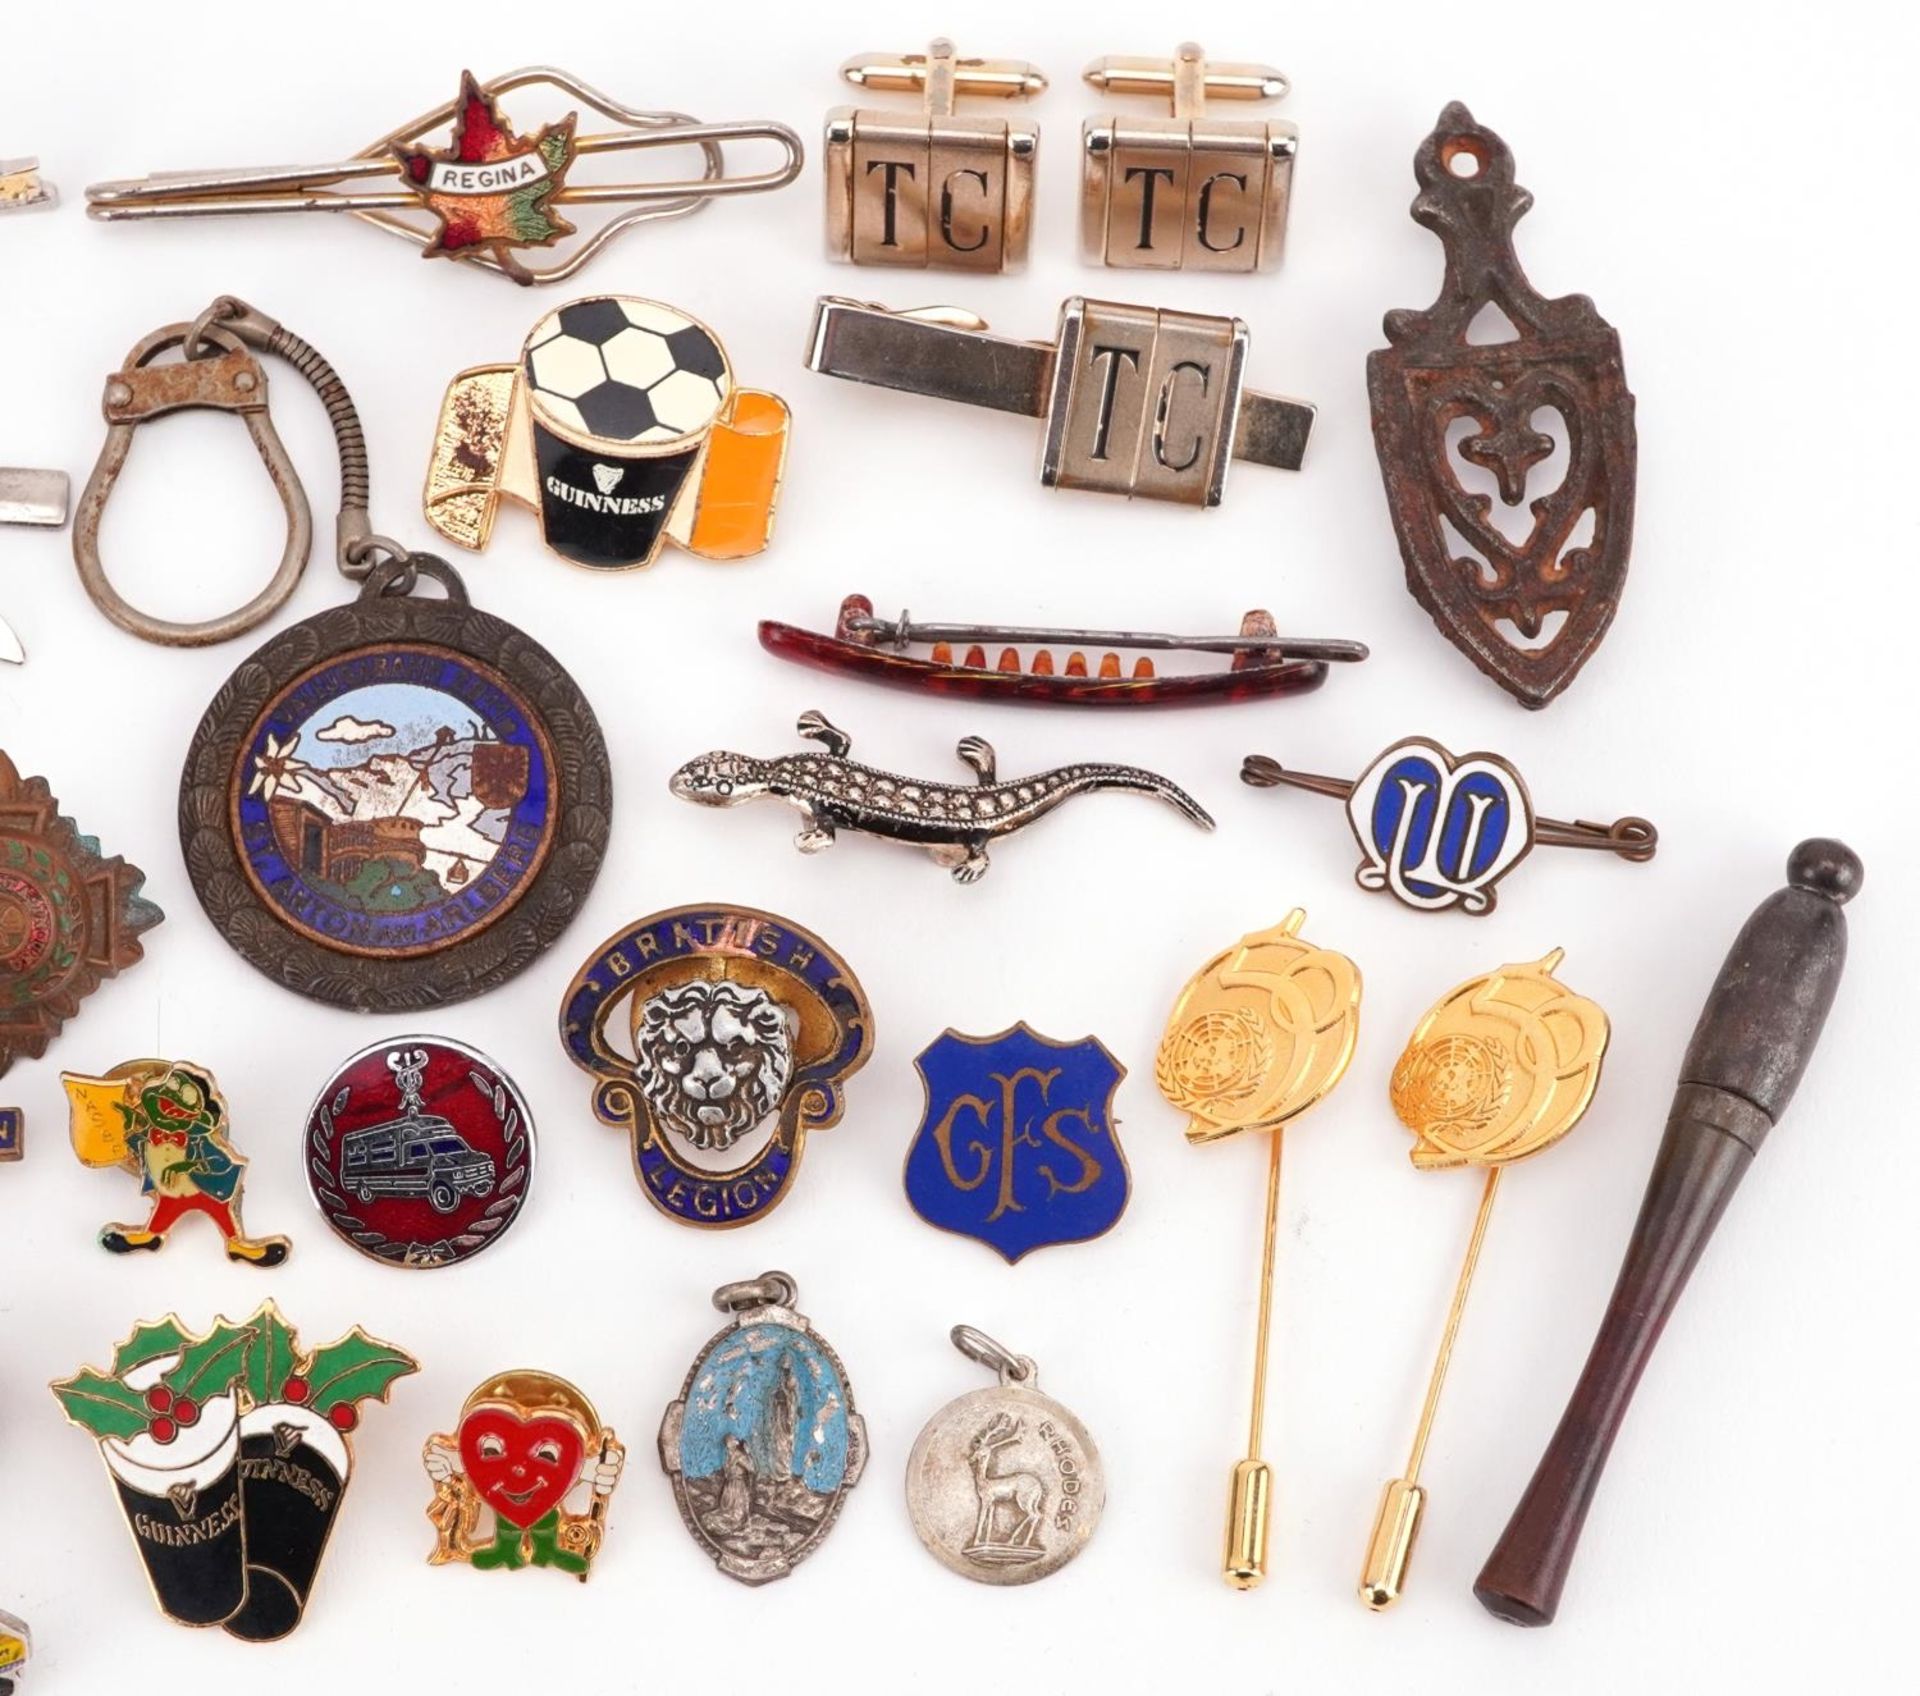 Vintage and later sundry items including military badges, brooches and stickpins - Image 3 of 4